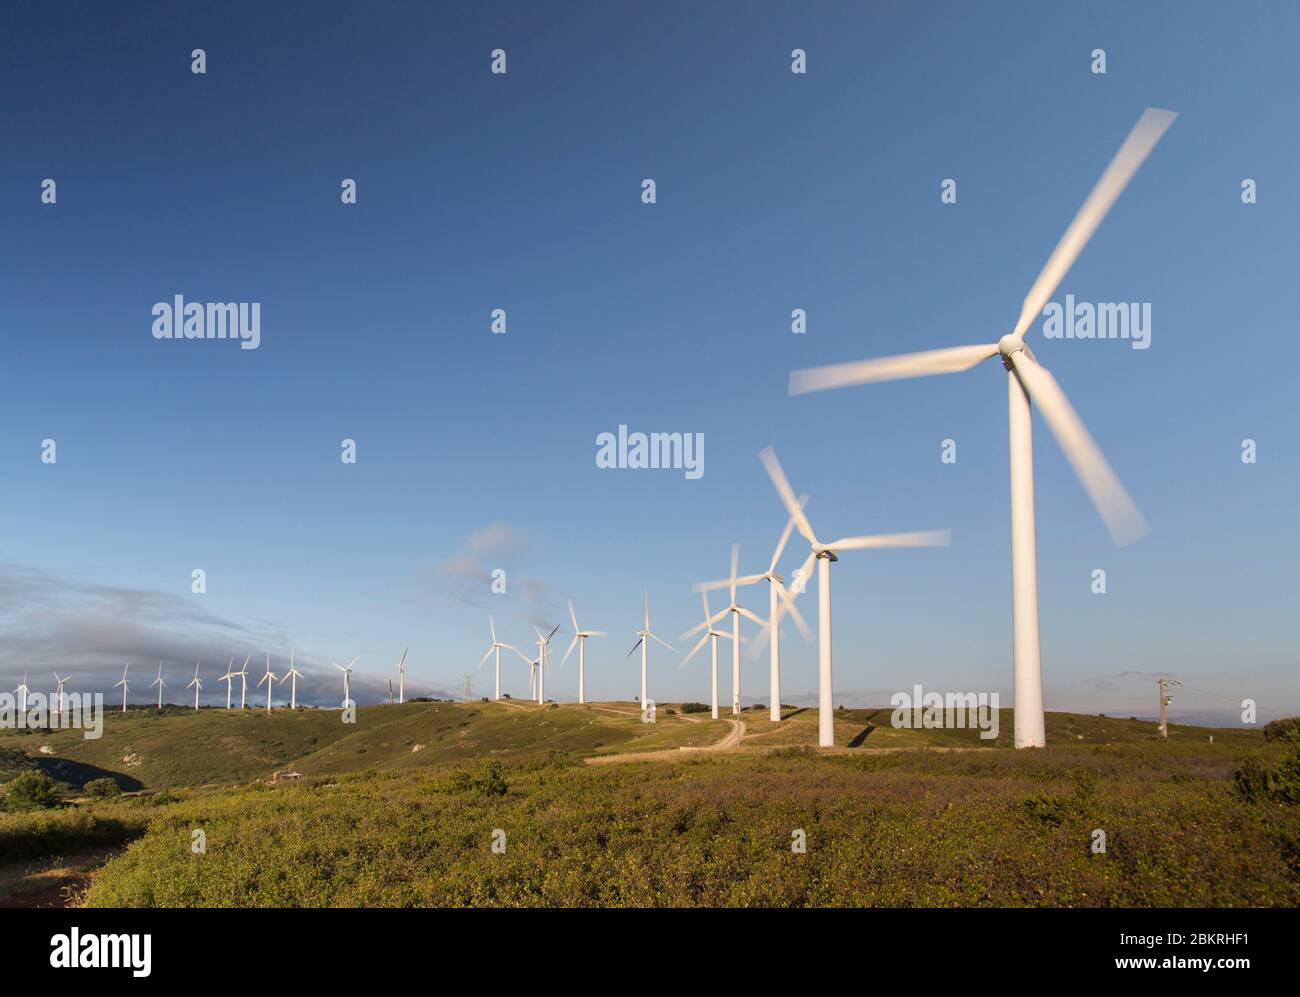 France, Aude, Nevian, Grande Garrigue de Nevian wind farm, composed of 21 wind turbines, 0.85MW gamesa eolica turbine for a total power of 17.55 MW, Compagnie du vent LCV, Engie Green, subsidiary of '' Engie specialized in renewable energies Stock Photo